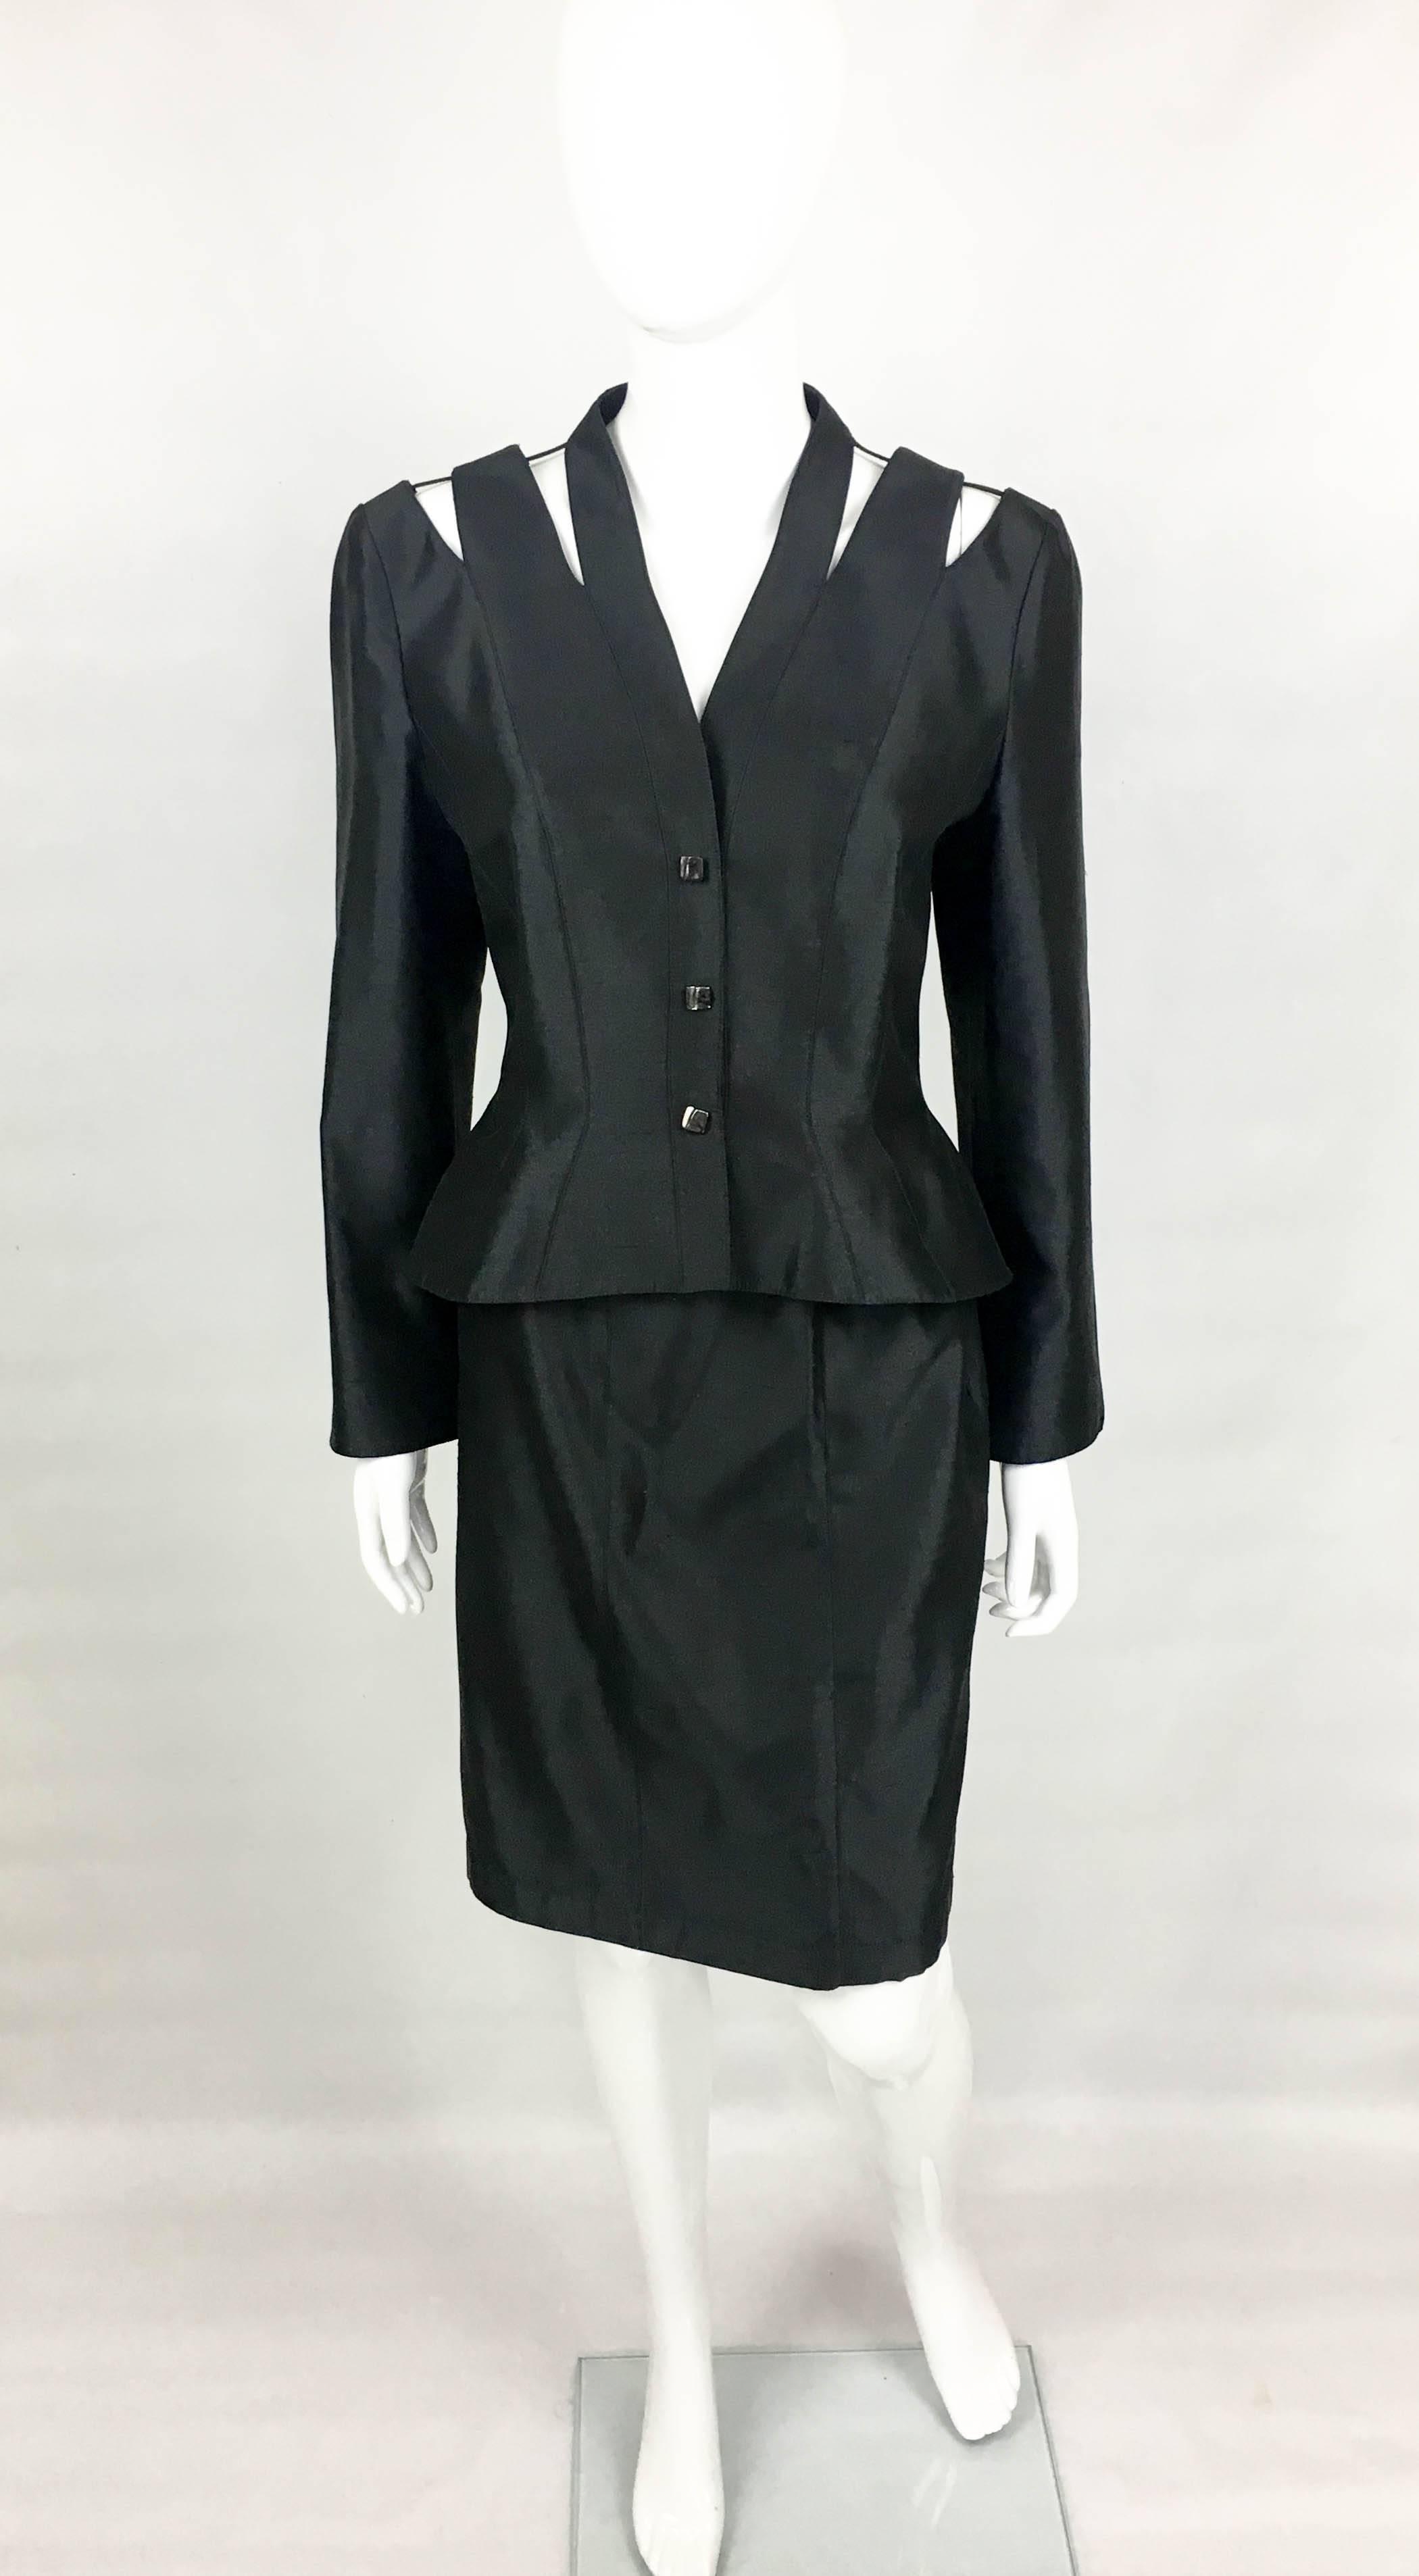 Vintage Mugler Black Silk Skirt Suit. This gorgeous suit by Thierry Mugler dates back from the 1990’s. Made in a black silk blend fabric, it consists of a knee length skirt and a long sleeve jacket. The jacket has a defined waist and it flares out,